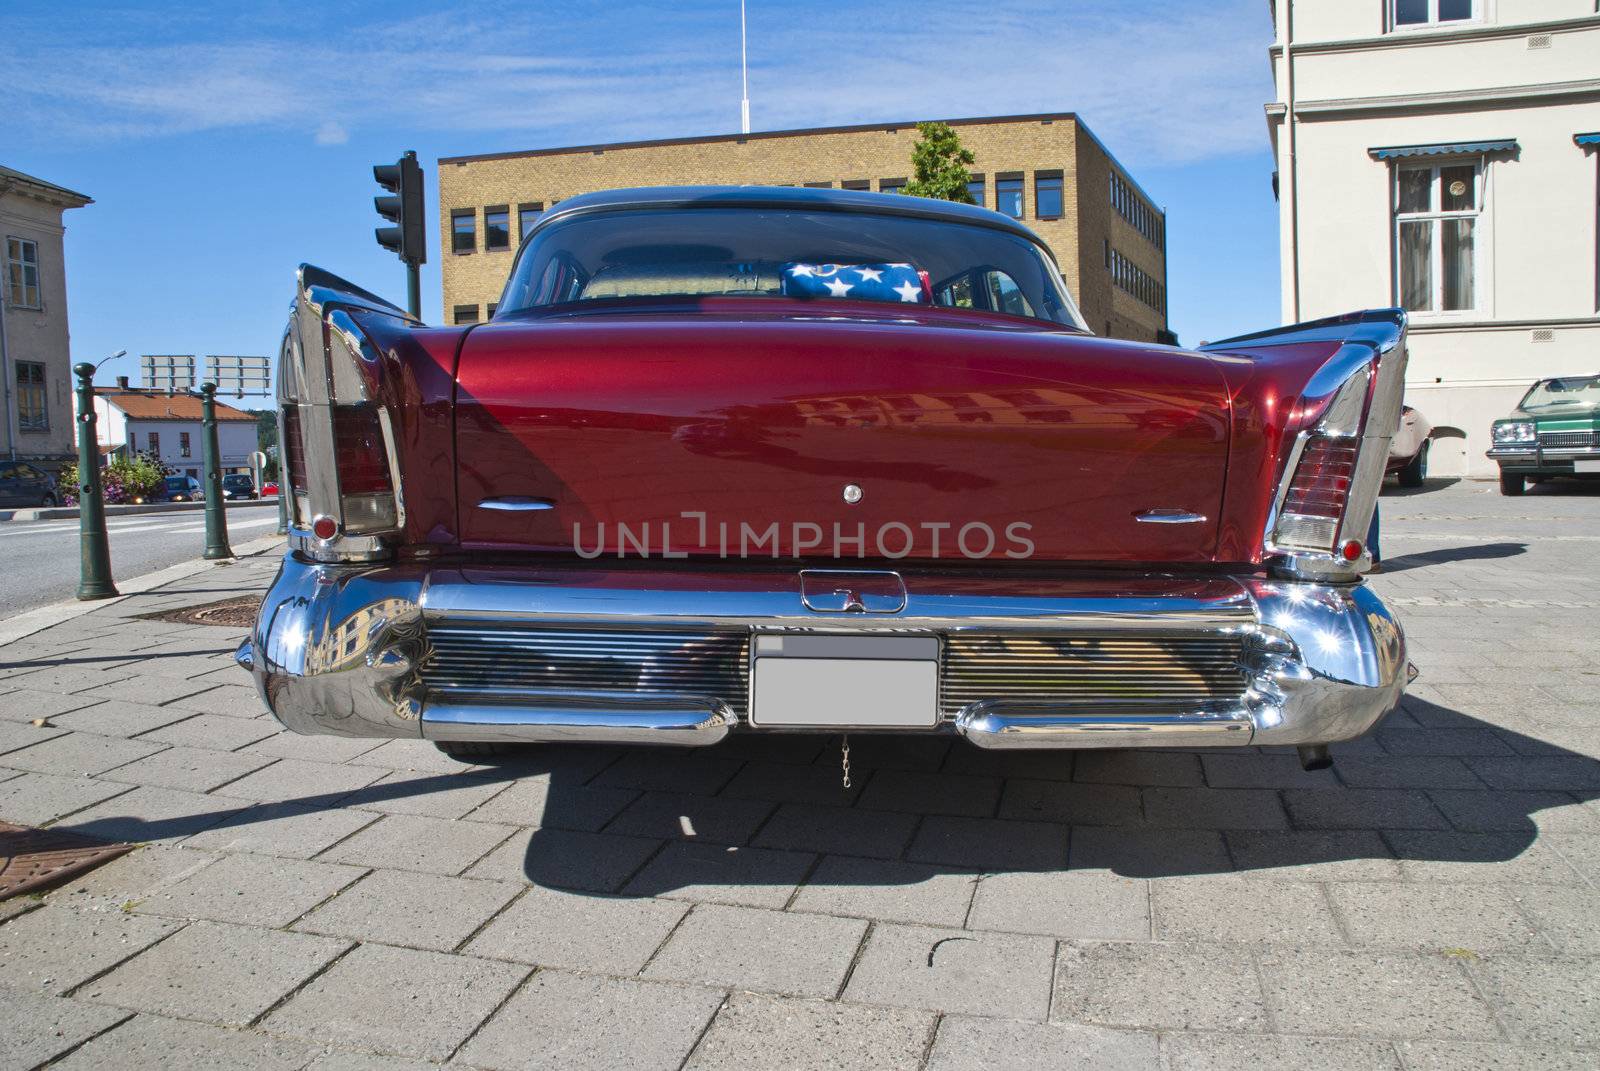 each wednesday during the summer months there is a display of american vintage cars in the center of halden city, picture shows a 1959 buick special